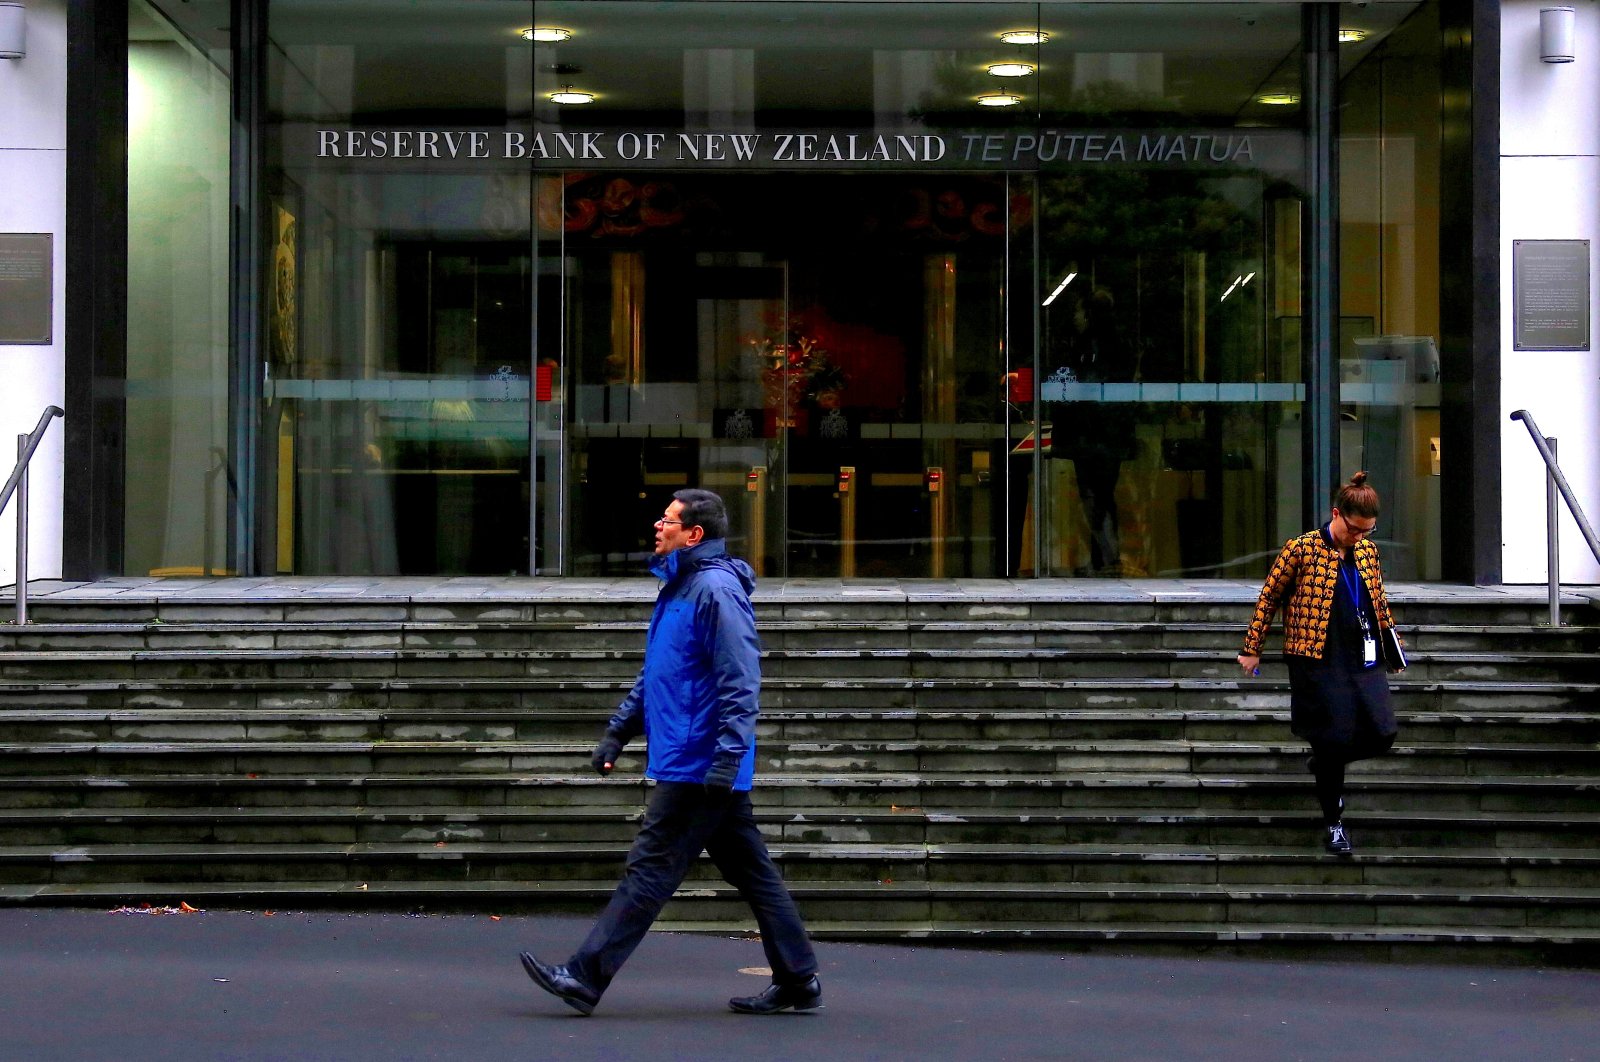 Pedestrians walk near the main entrance of the Reserve Bank of New Zealand located in central Wellington, New Zealand, July 3, 2017. (Reuters Photo)